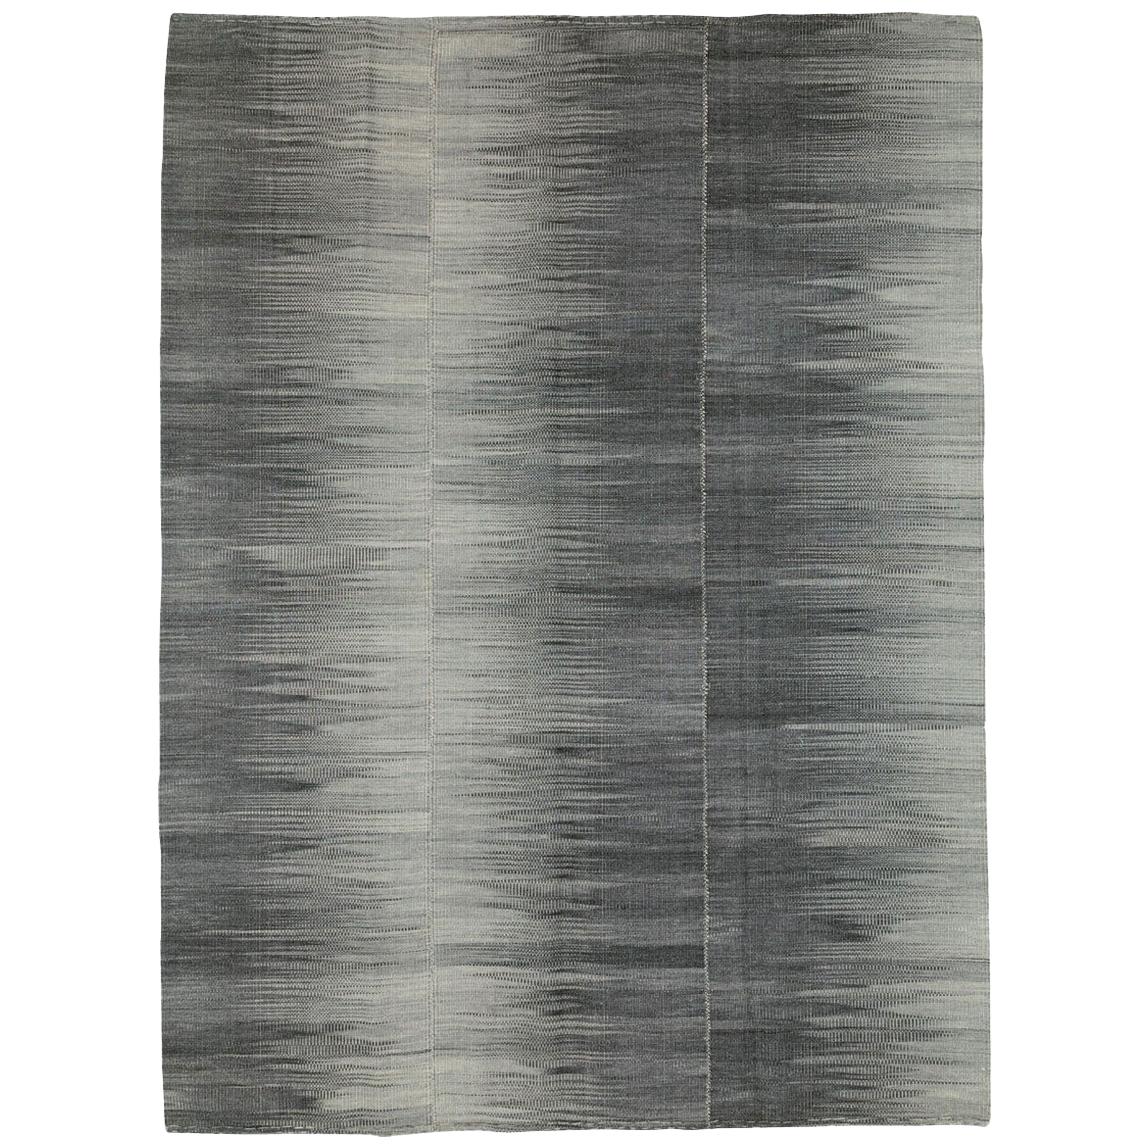 Contemporary Handmade Turkish Flat-Weave Accent Rug in Black Charcoal Grey For Sale